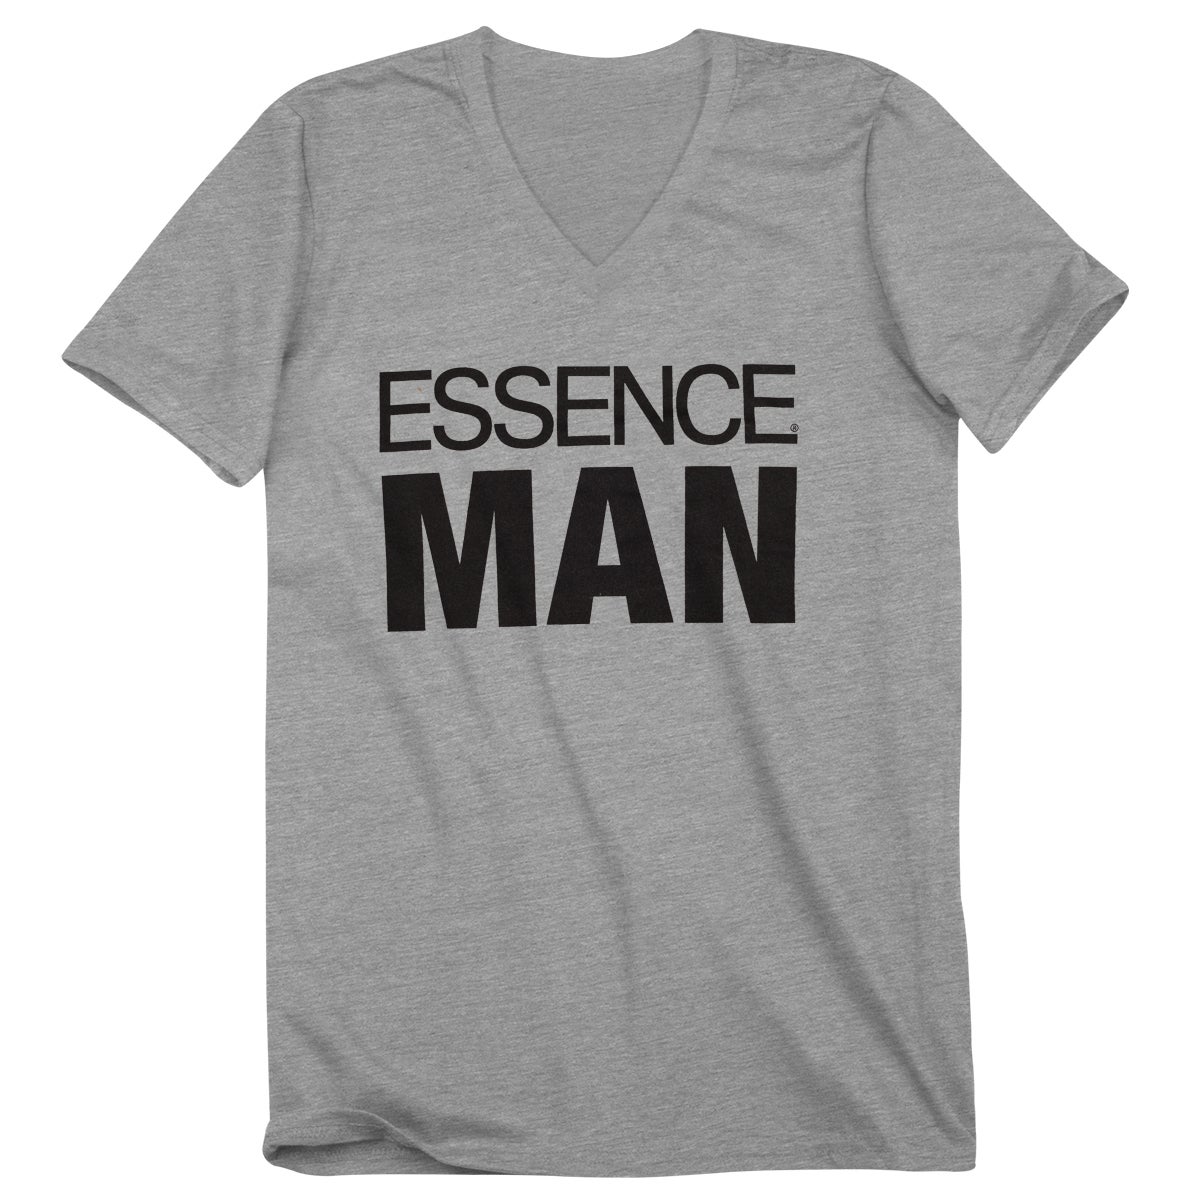 You're Going To Love This ESSENCE Merchandise!